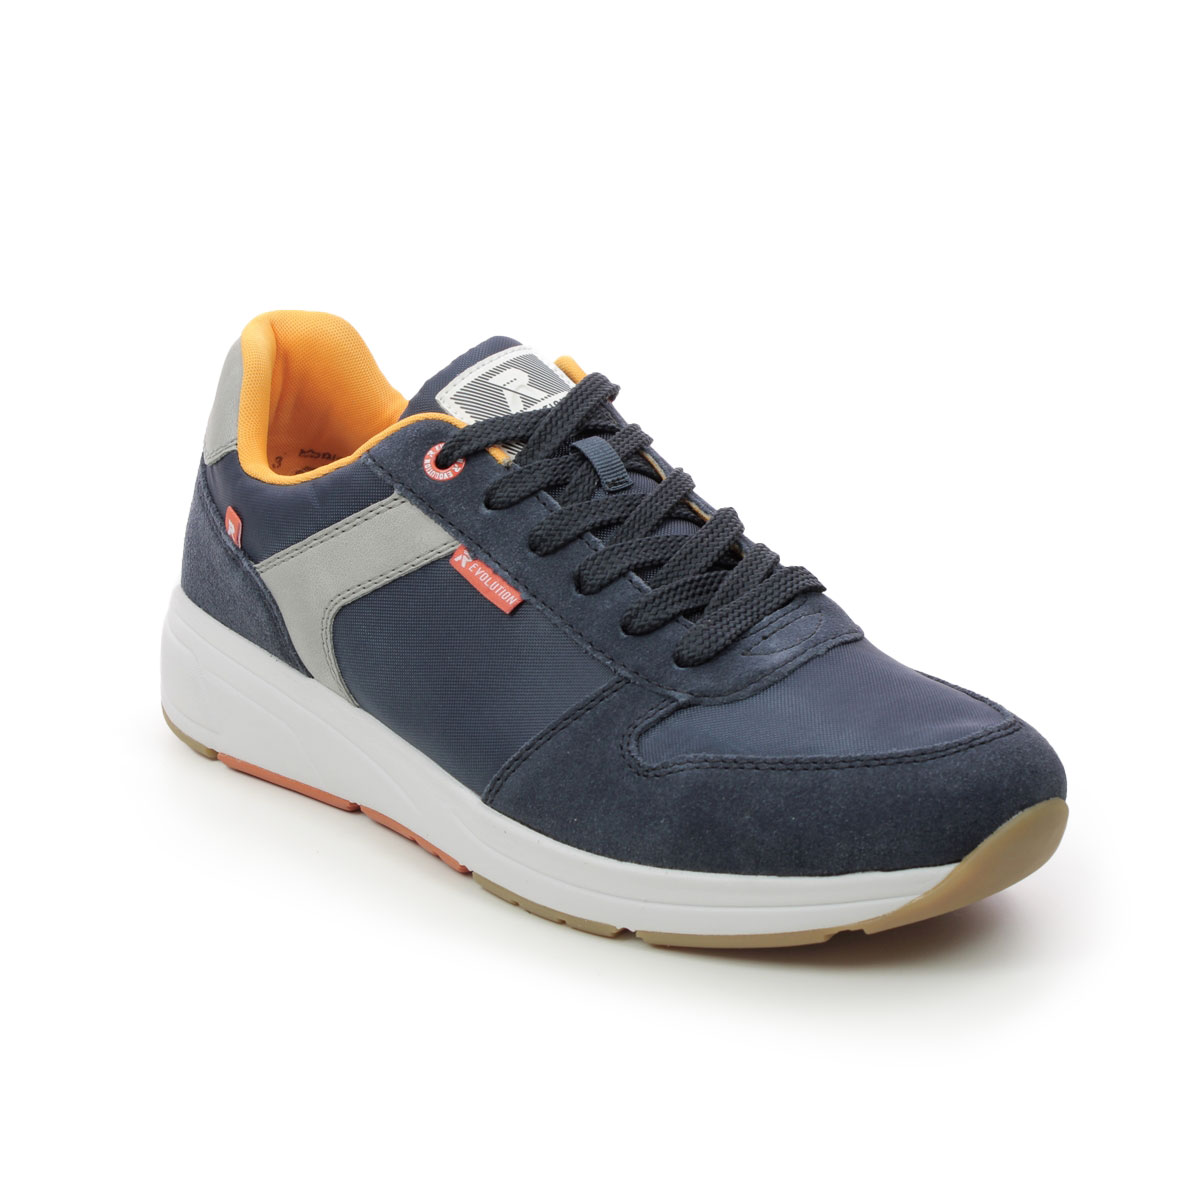 Rieker Archy Evo Navy Mens Trainers 07002-14 In Size 42 In Plain Navy